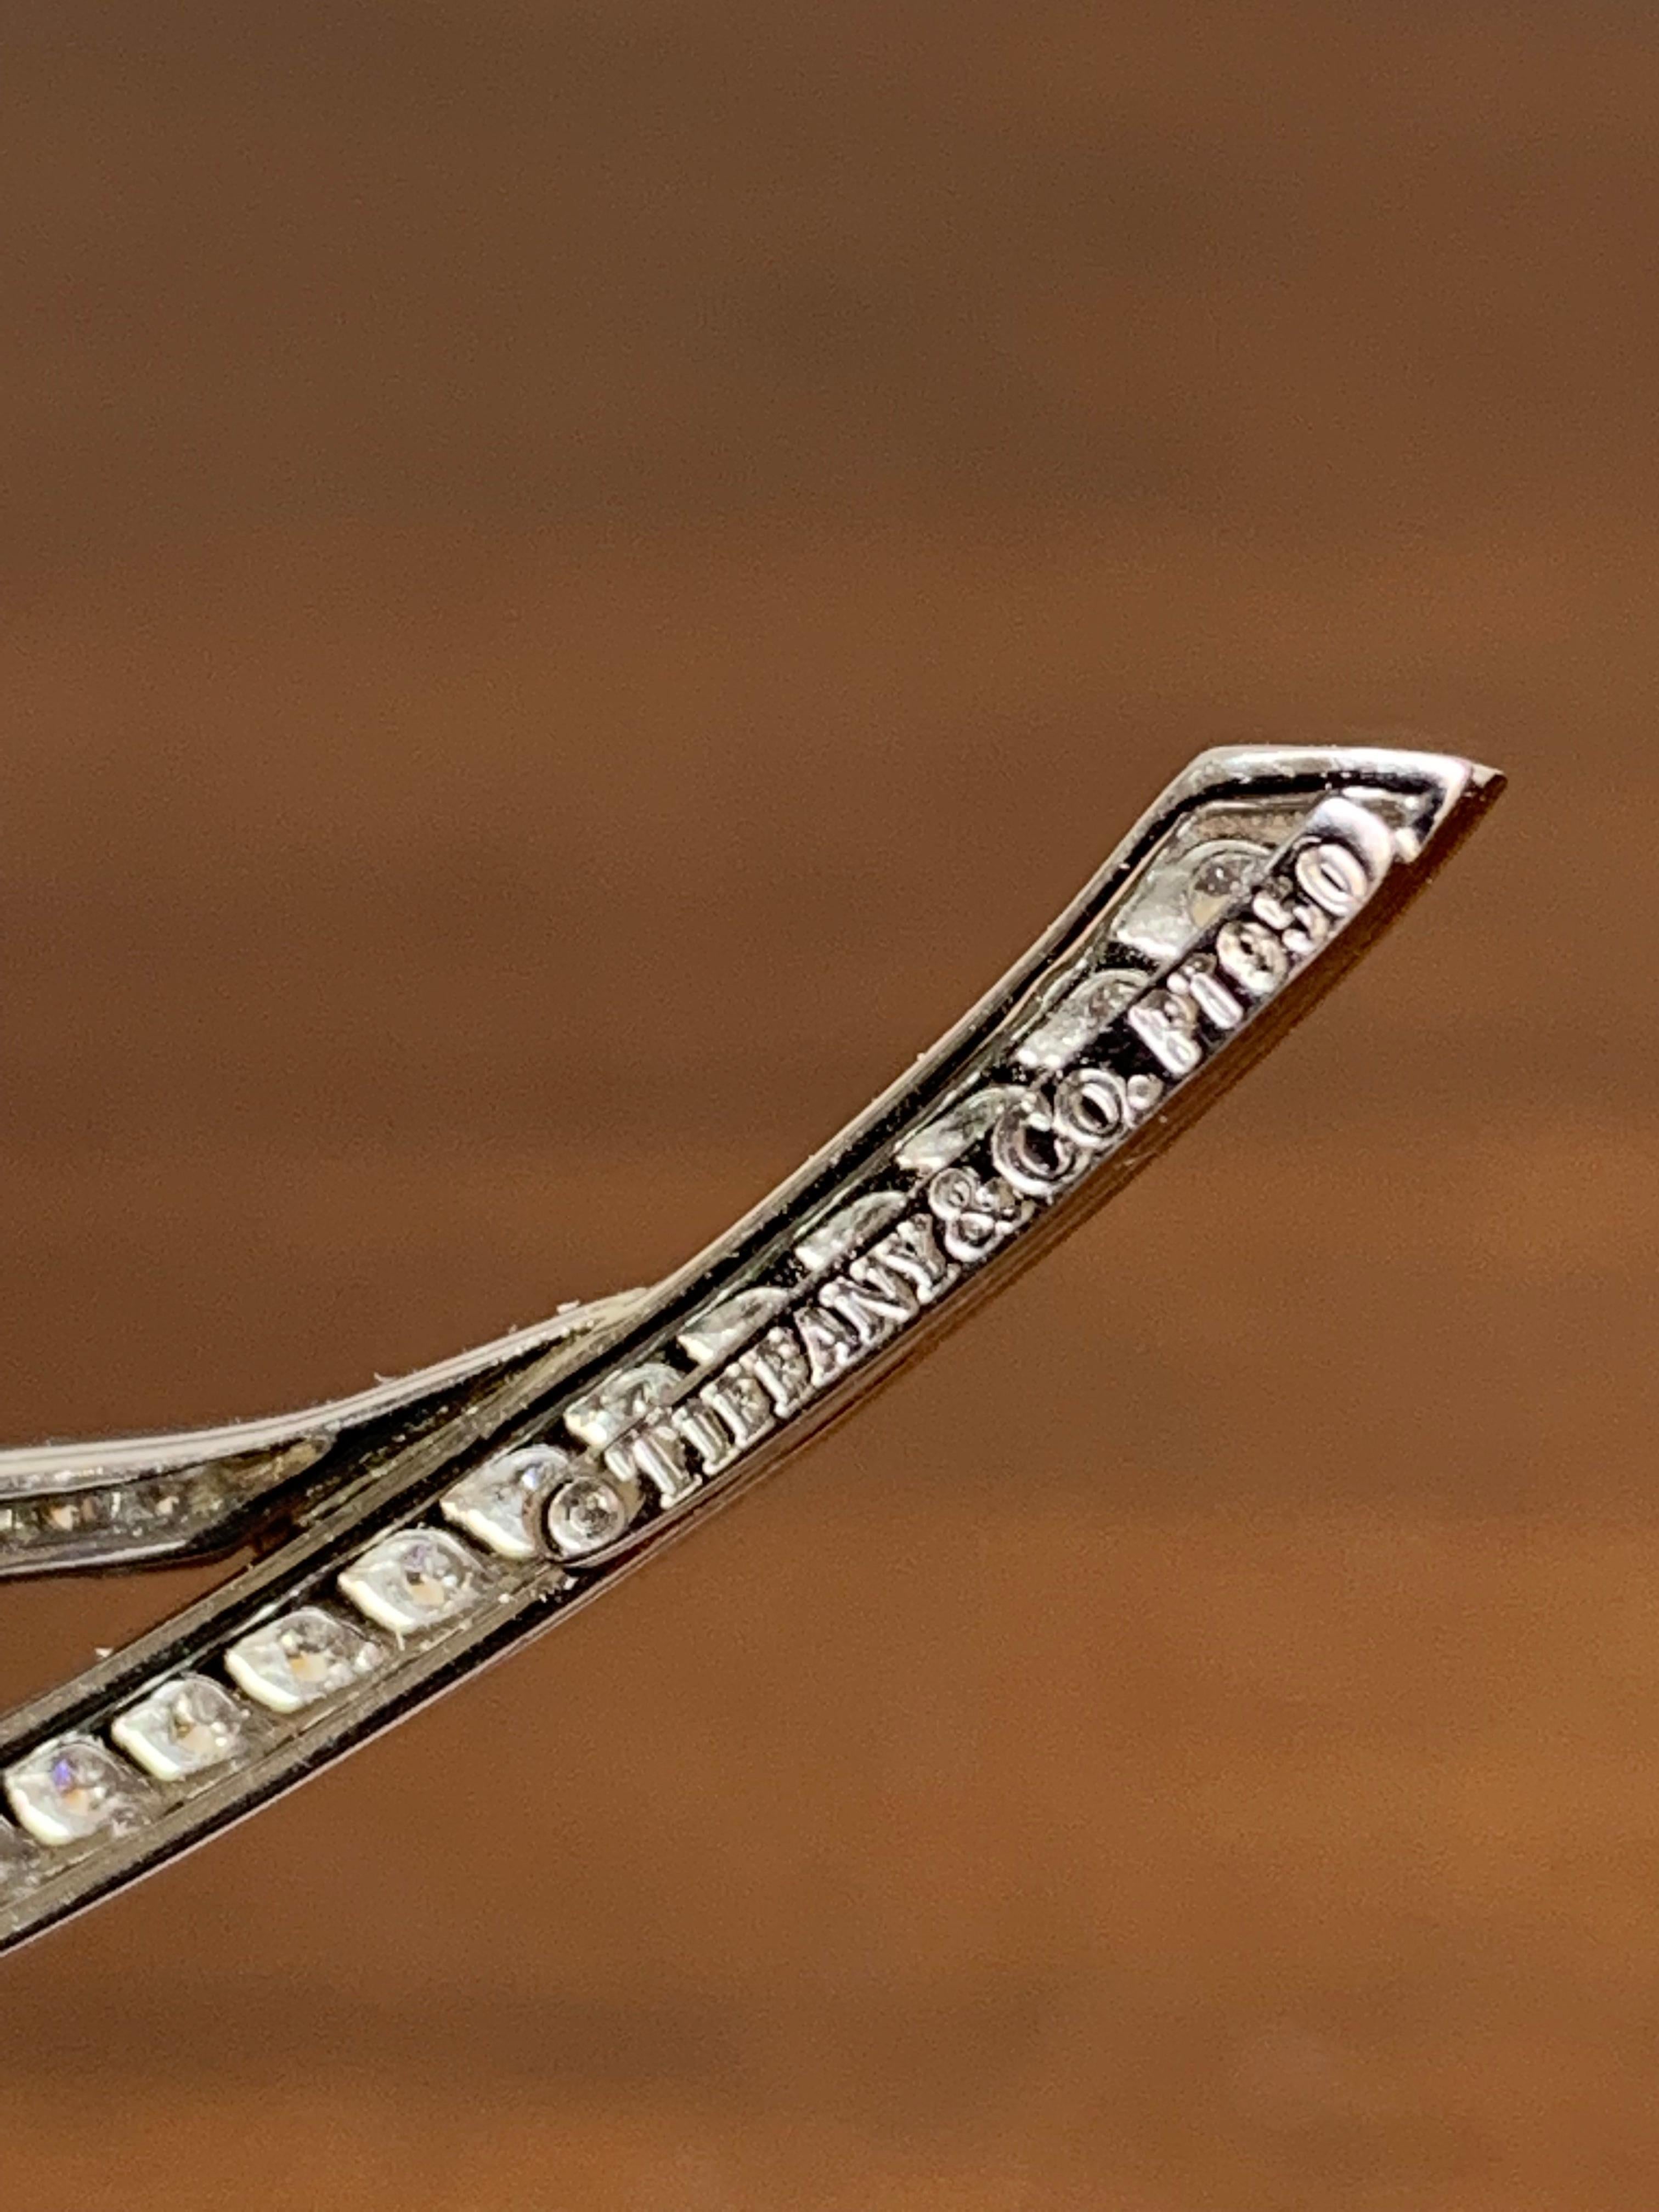 Tiffany & Co. Diamond and Platinum Daisy Brooch In Excellent Condition For Sale In New York, NY